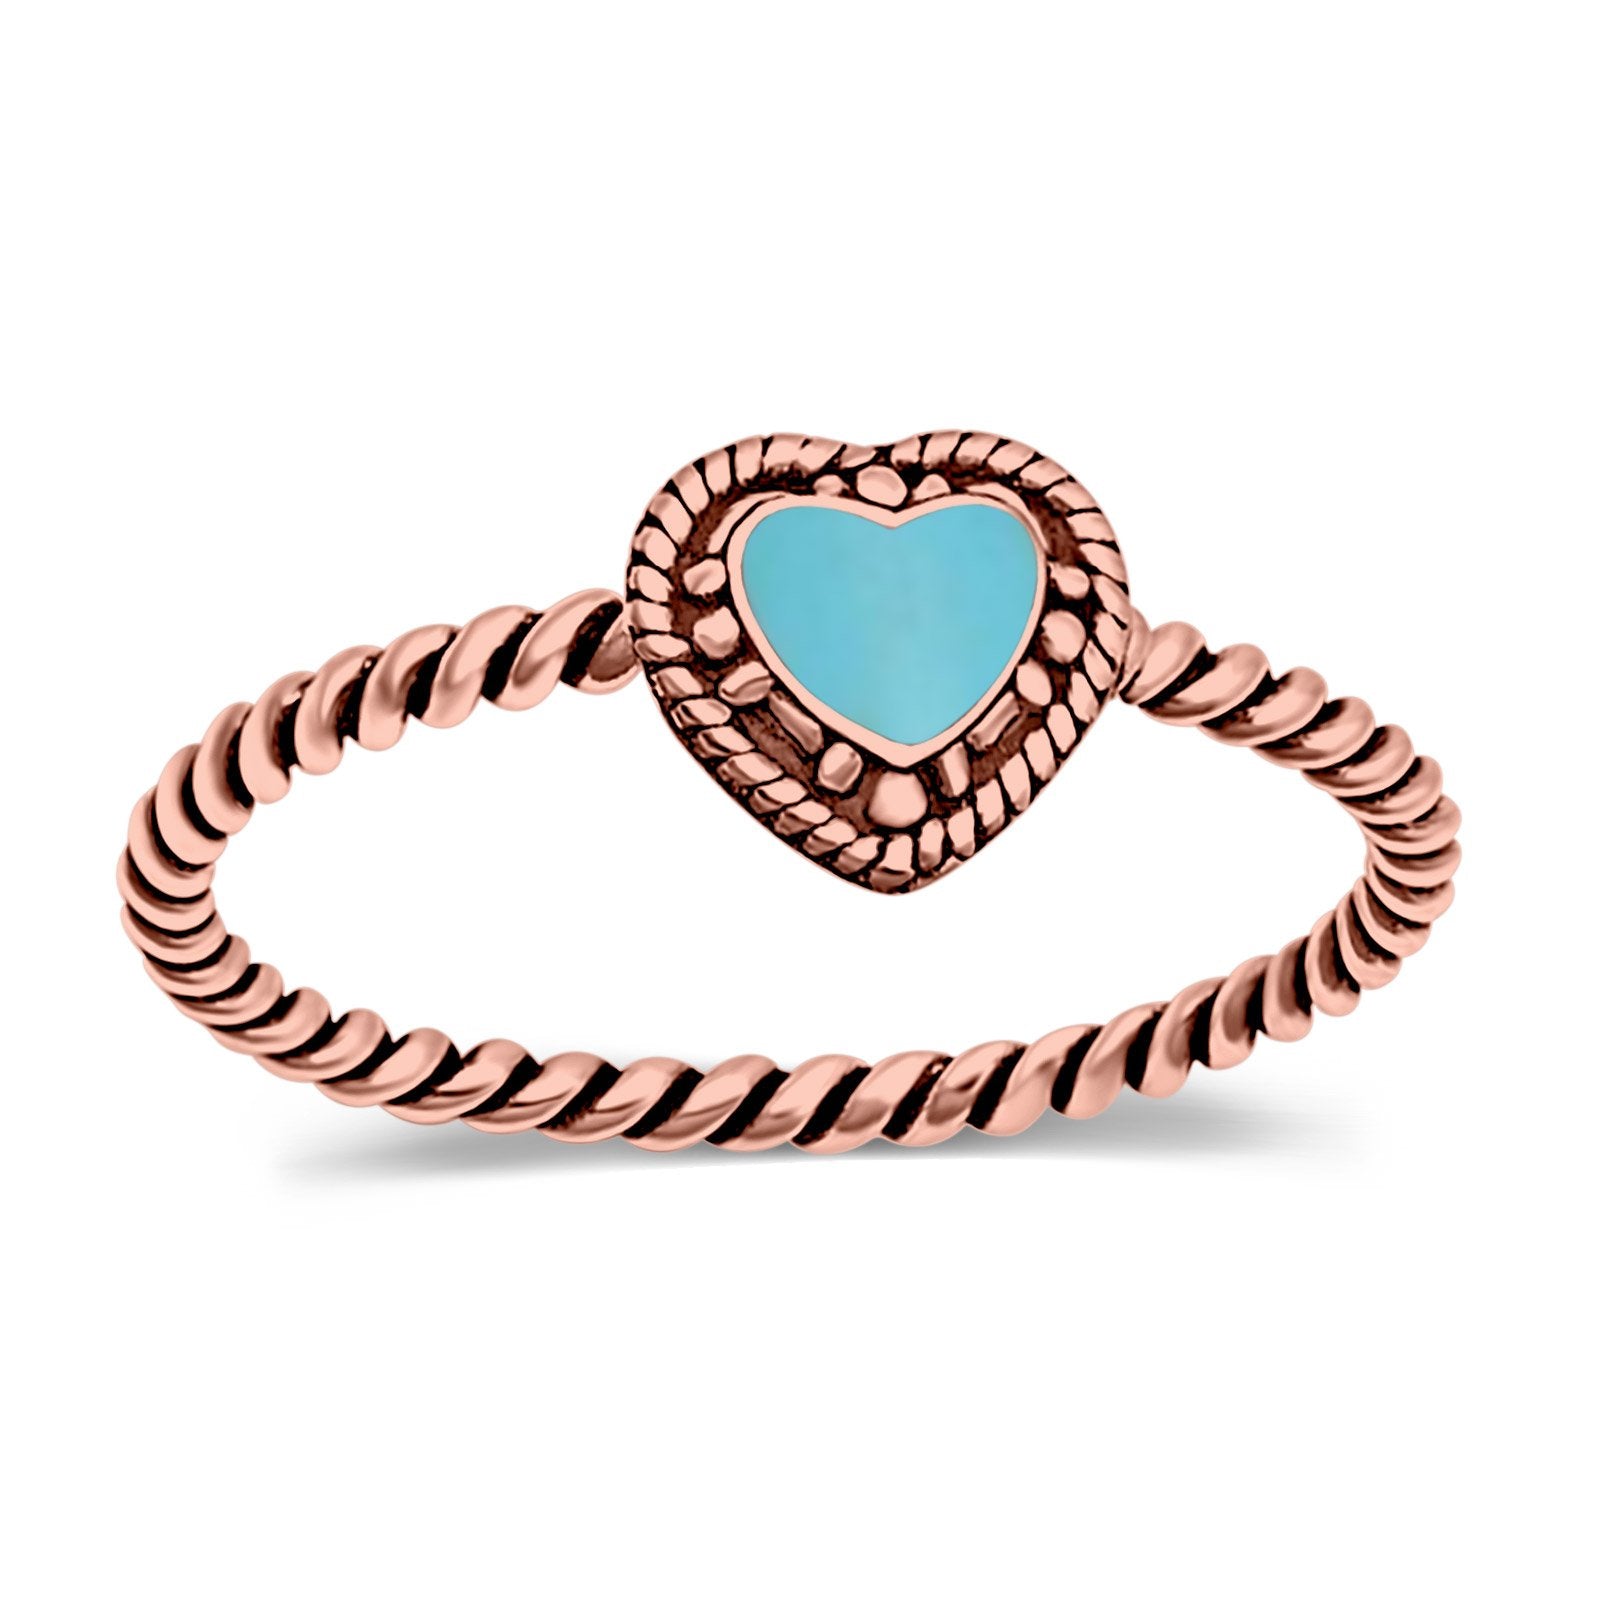 Petite Dainty Heart Promise Ring Band Oxidized Braided 925 Sterling Silver